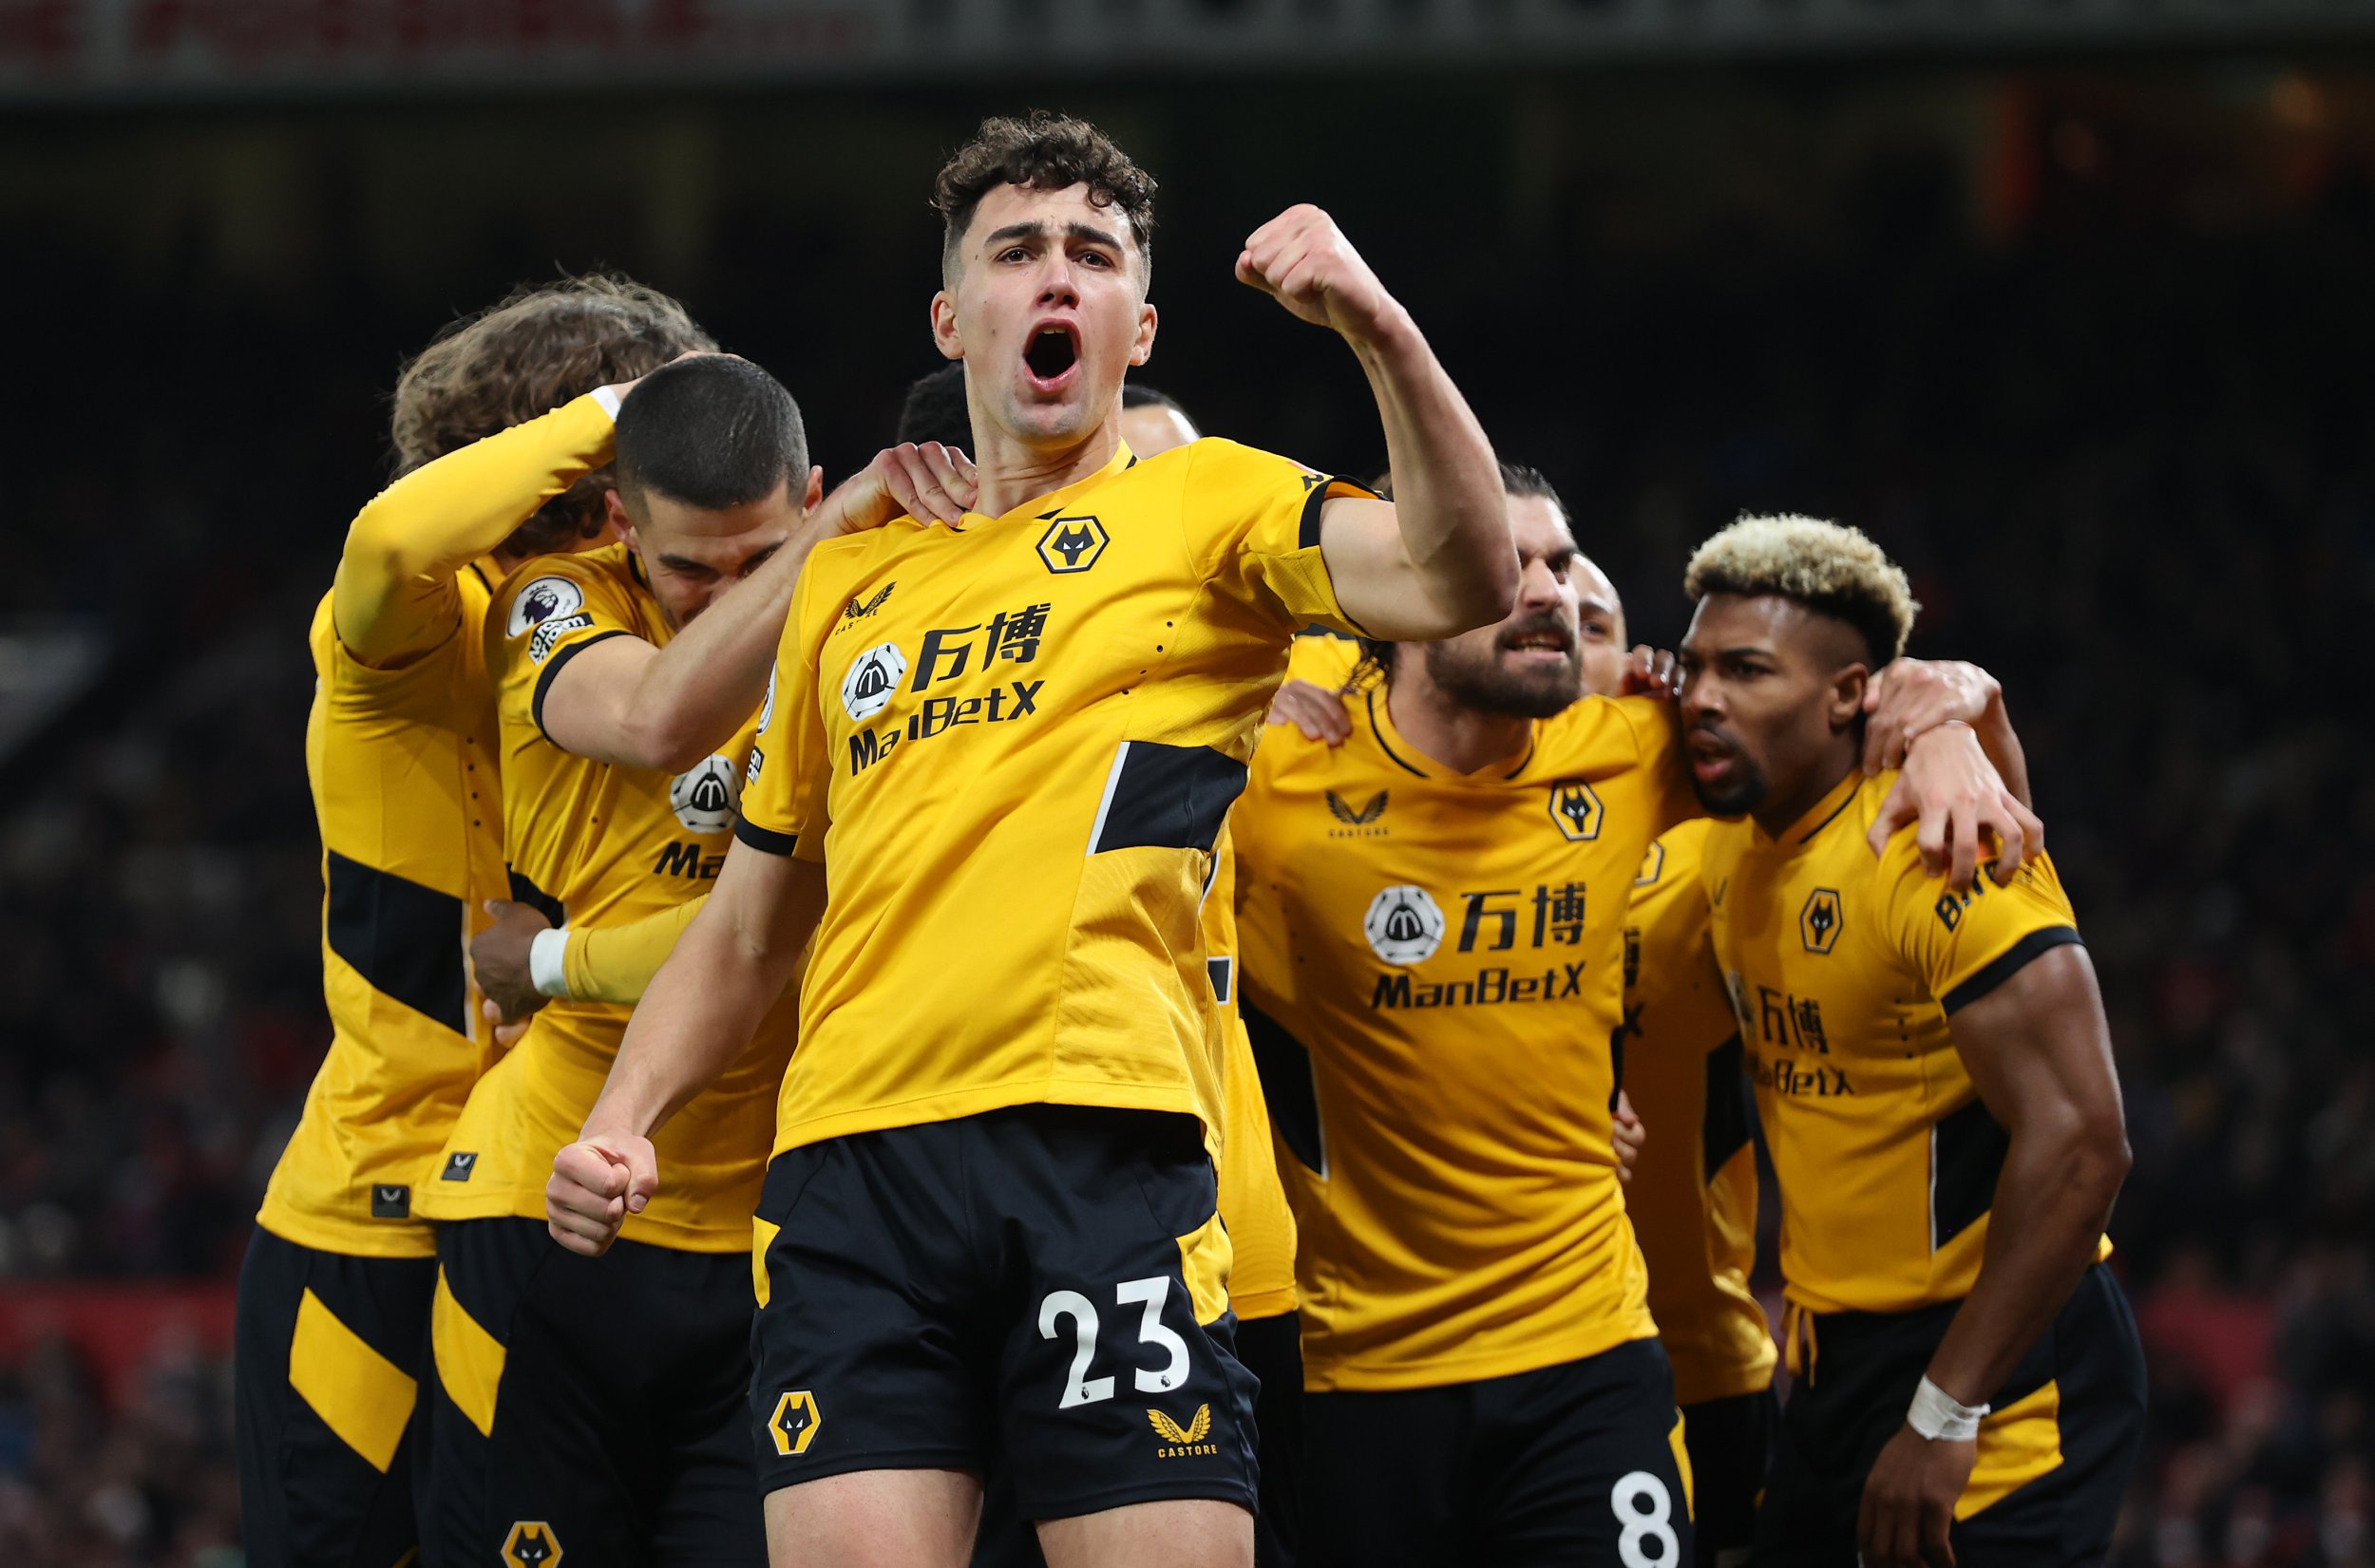 NEWS UPDATE: Matt Hobbs has been speaking about whether Wolves will have the ability to spend money on new players in January….